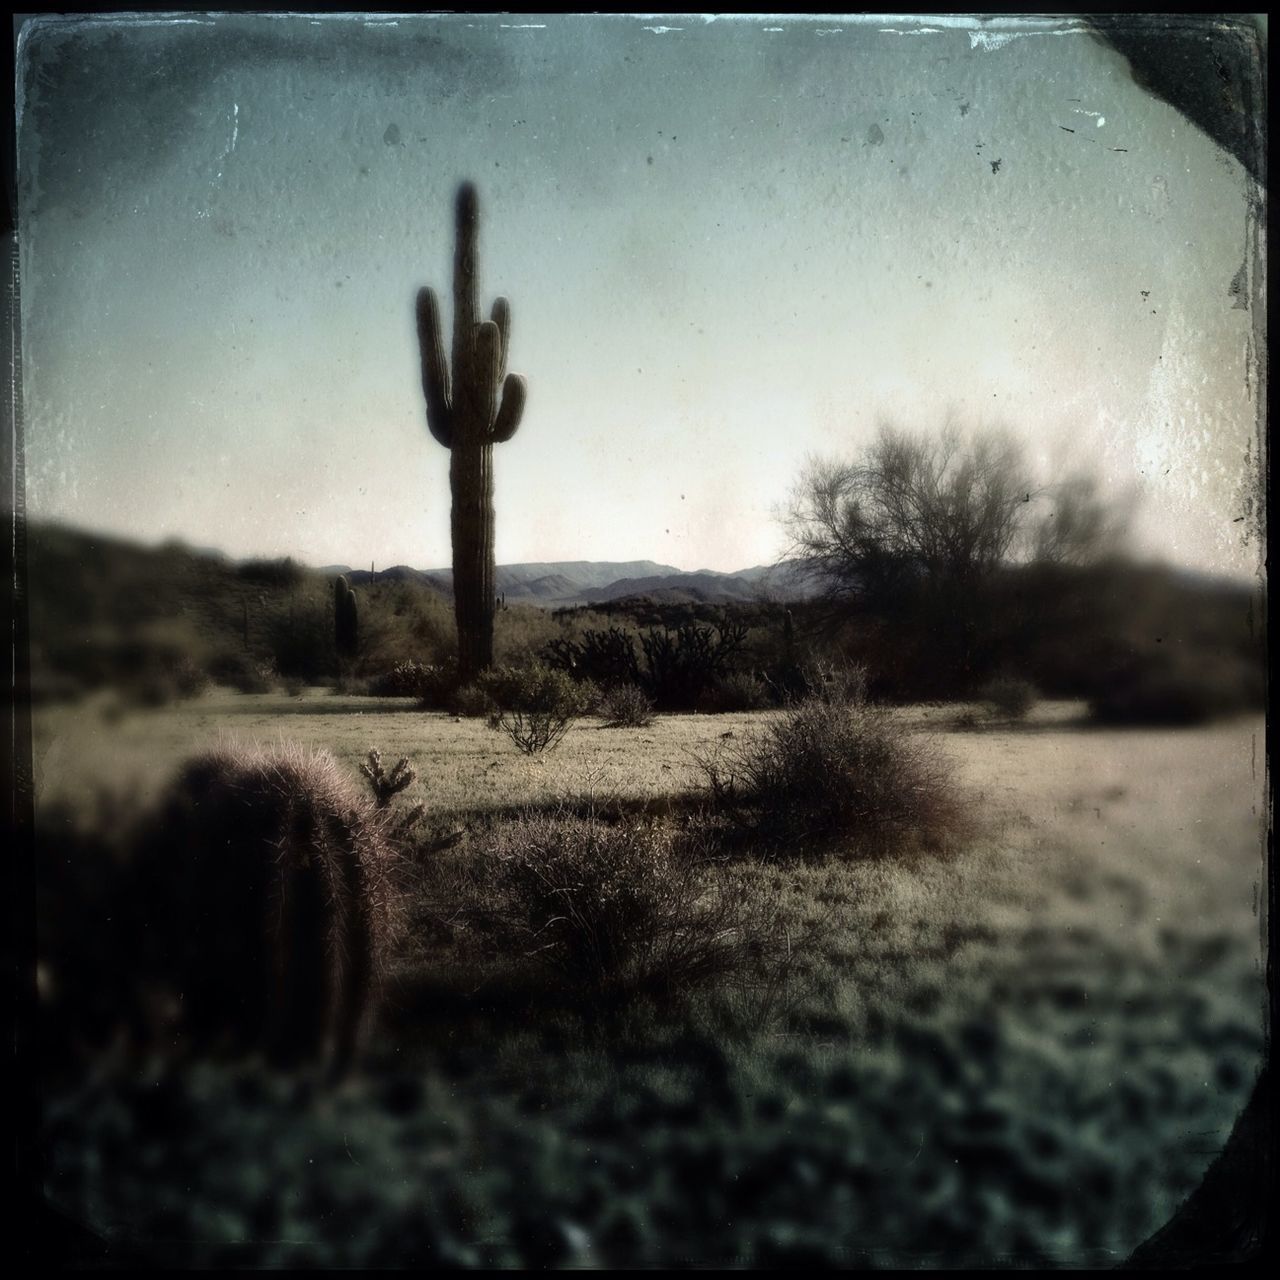 Hipstamatic Tinto in the Desert